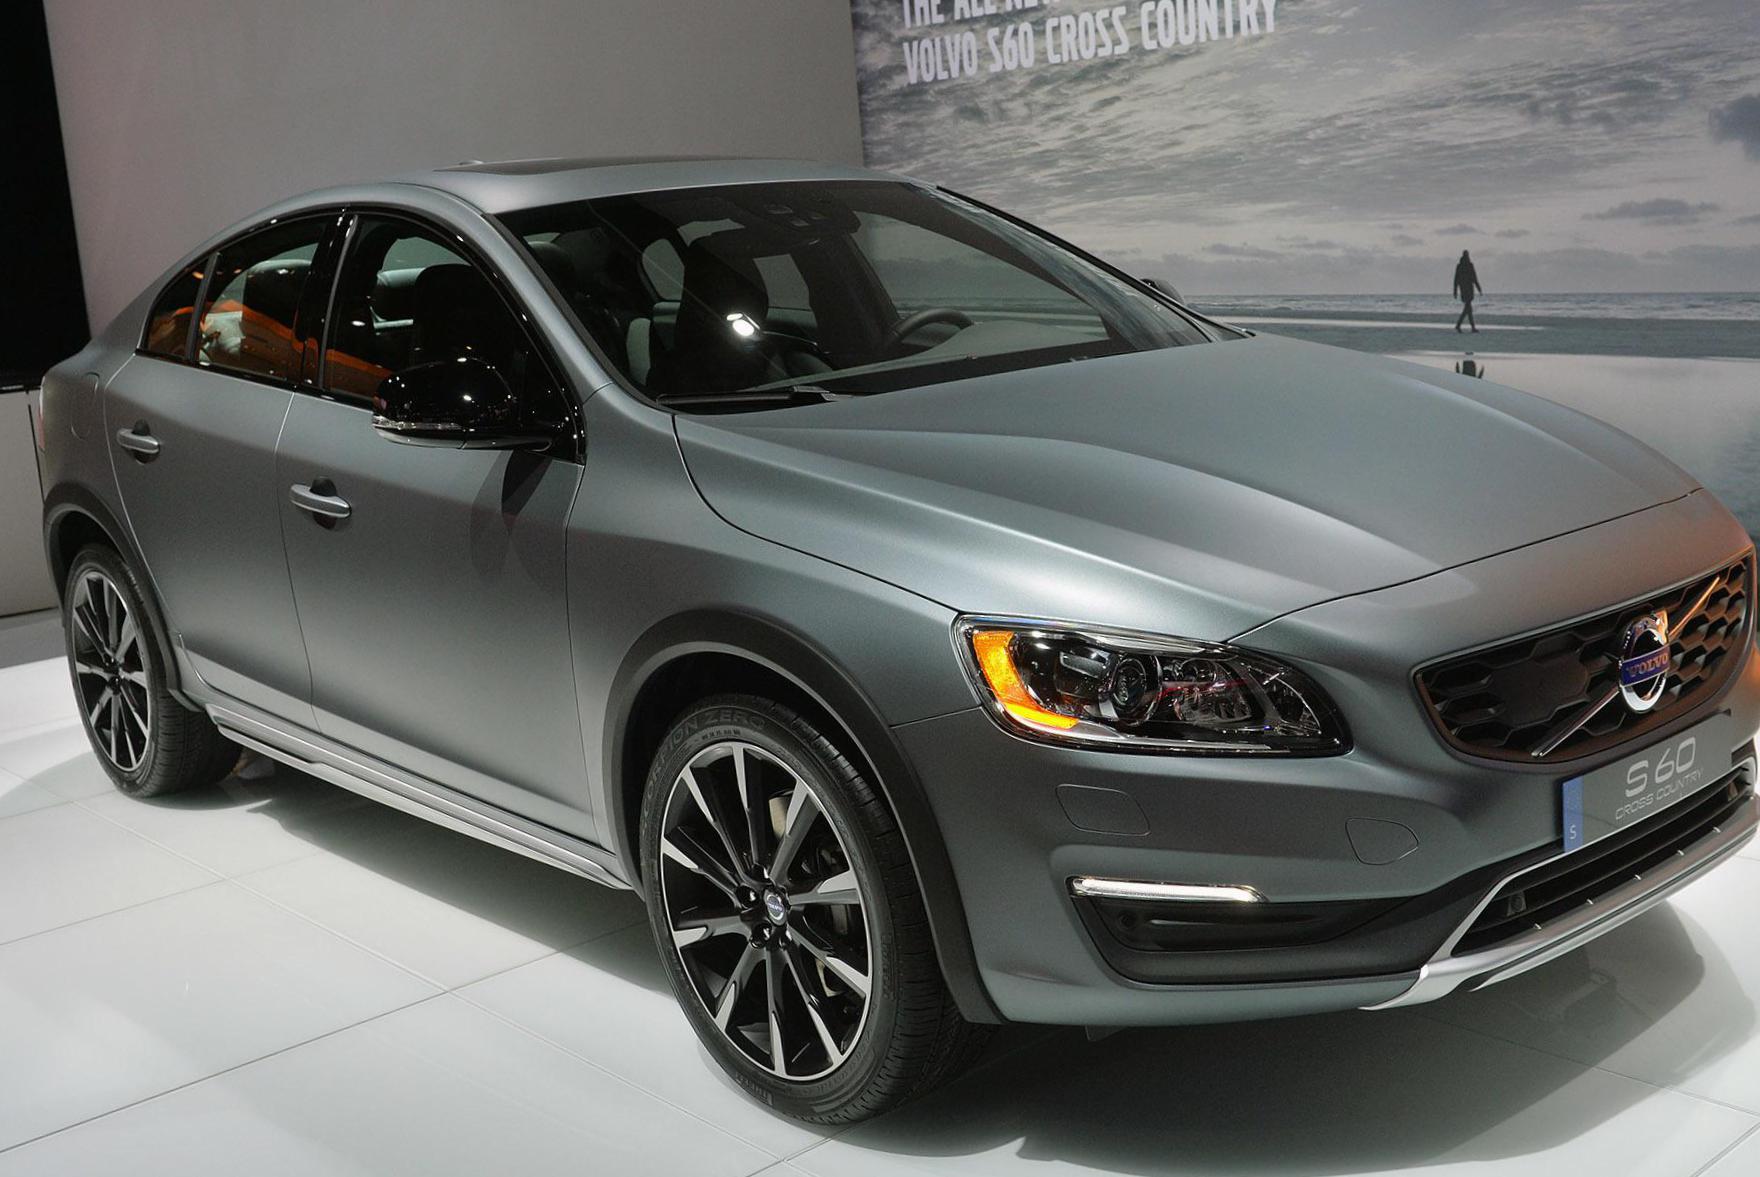 Volvo S60 Cross Country for sale 2014